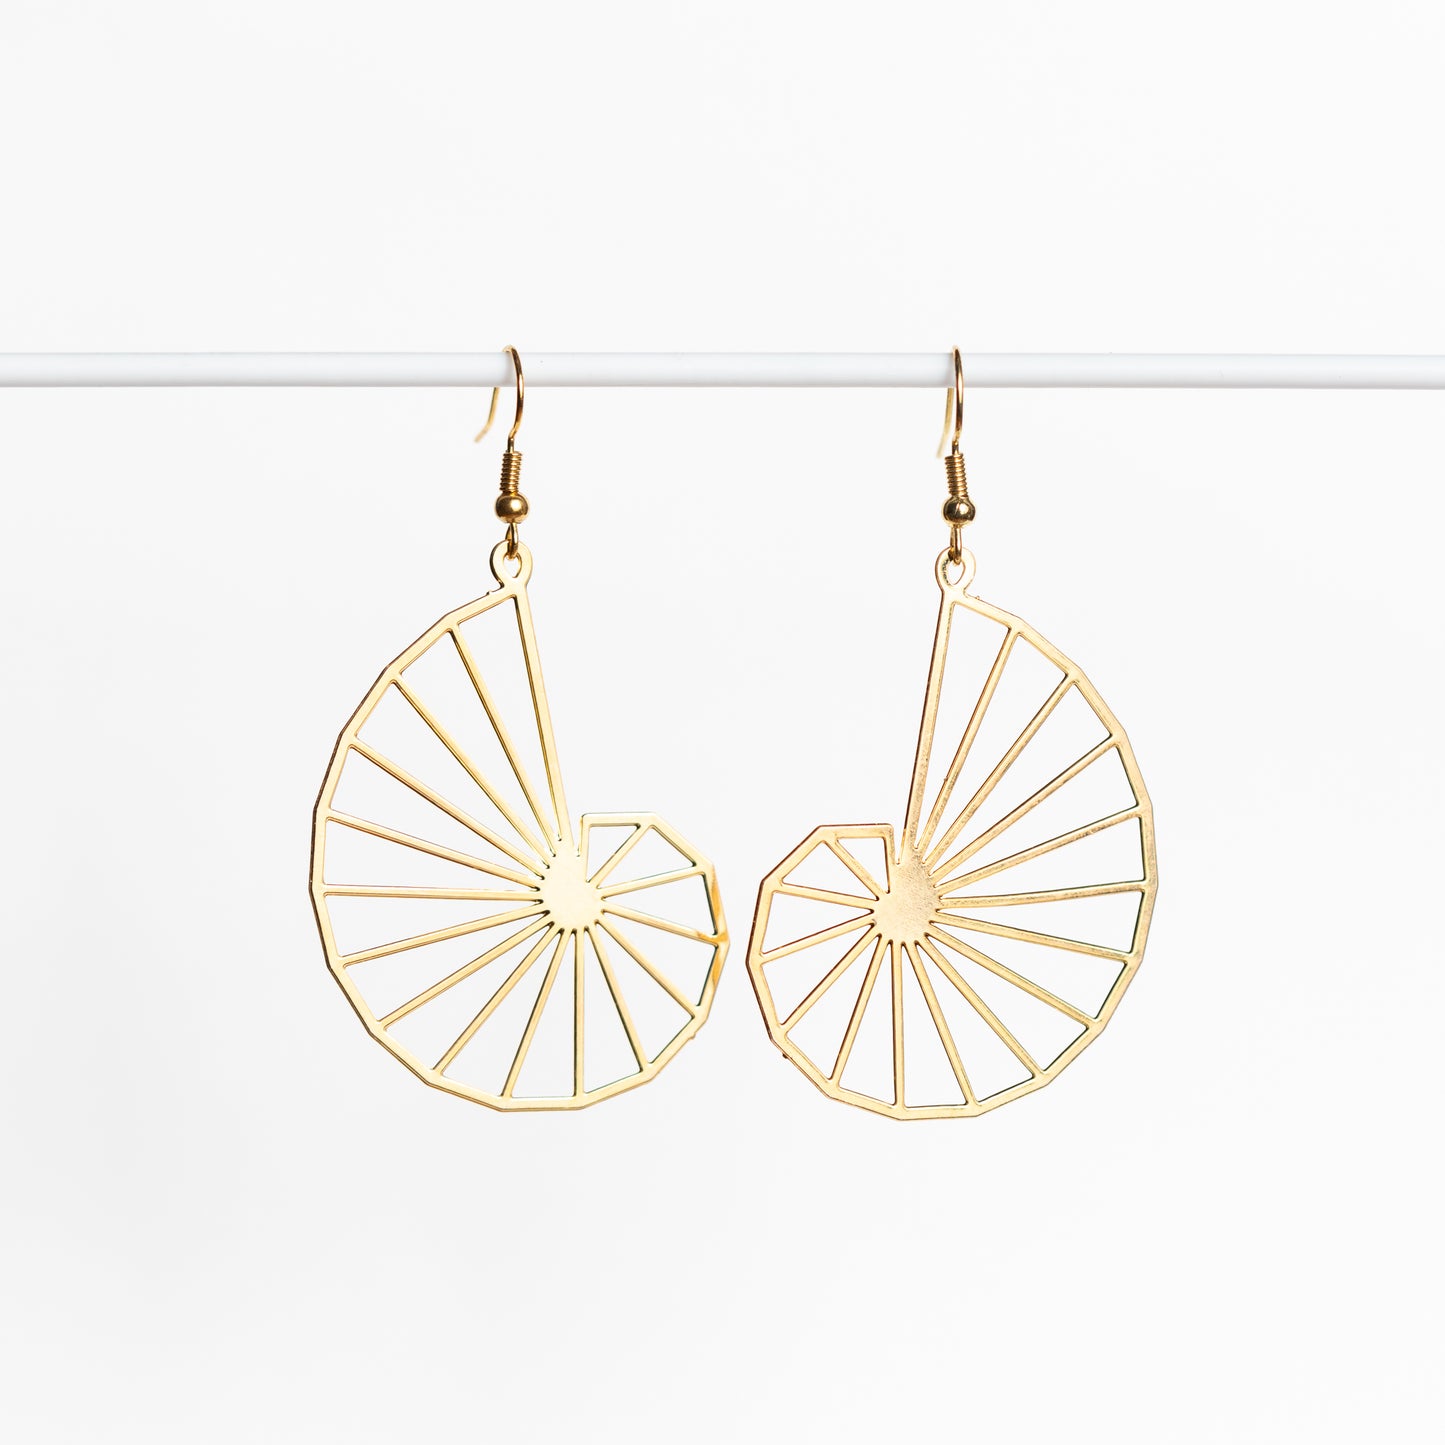 Nautilus Spiral Earrings in Gold